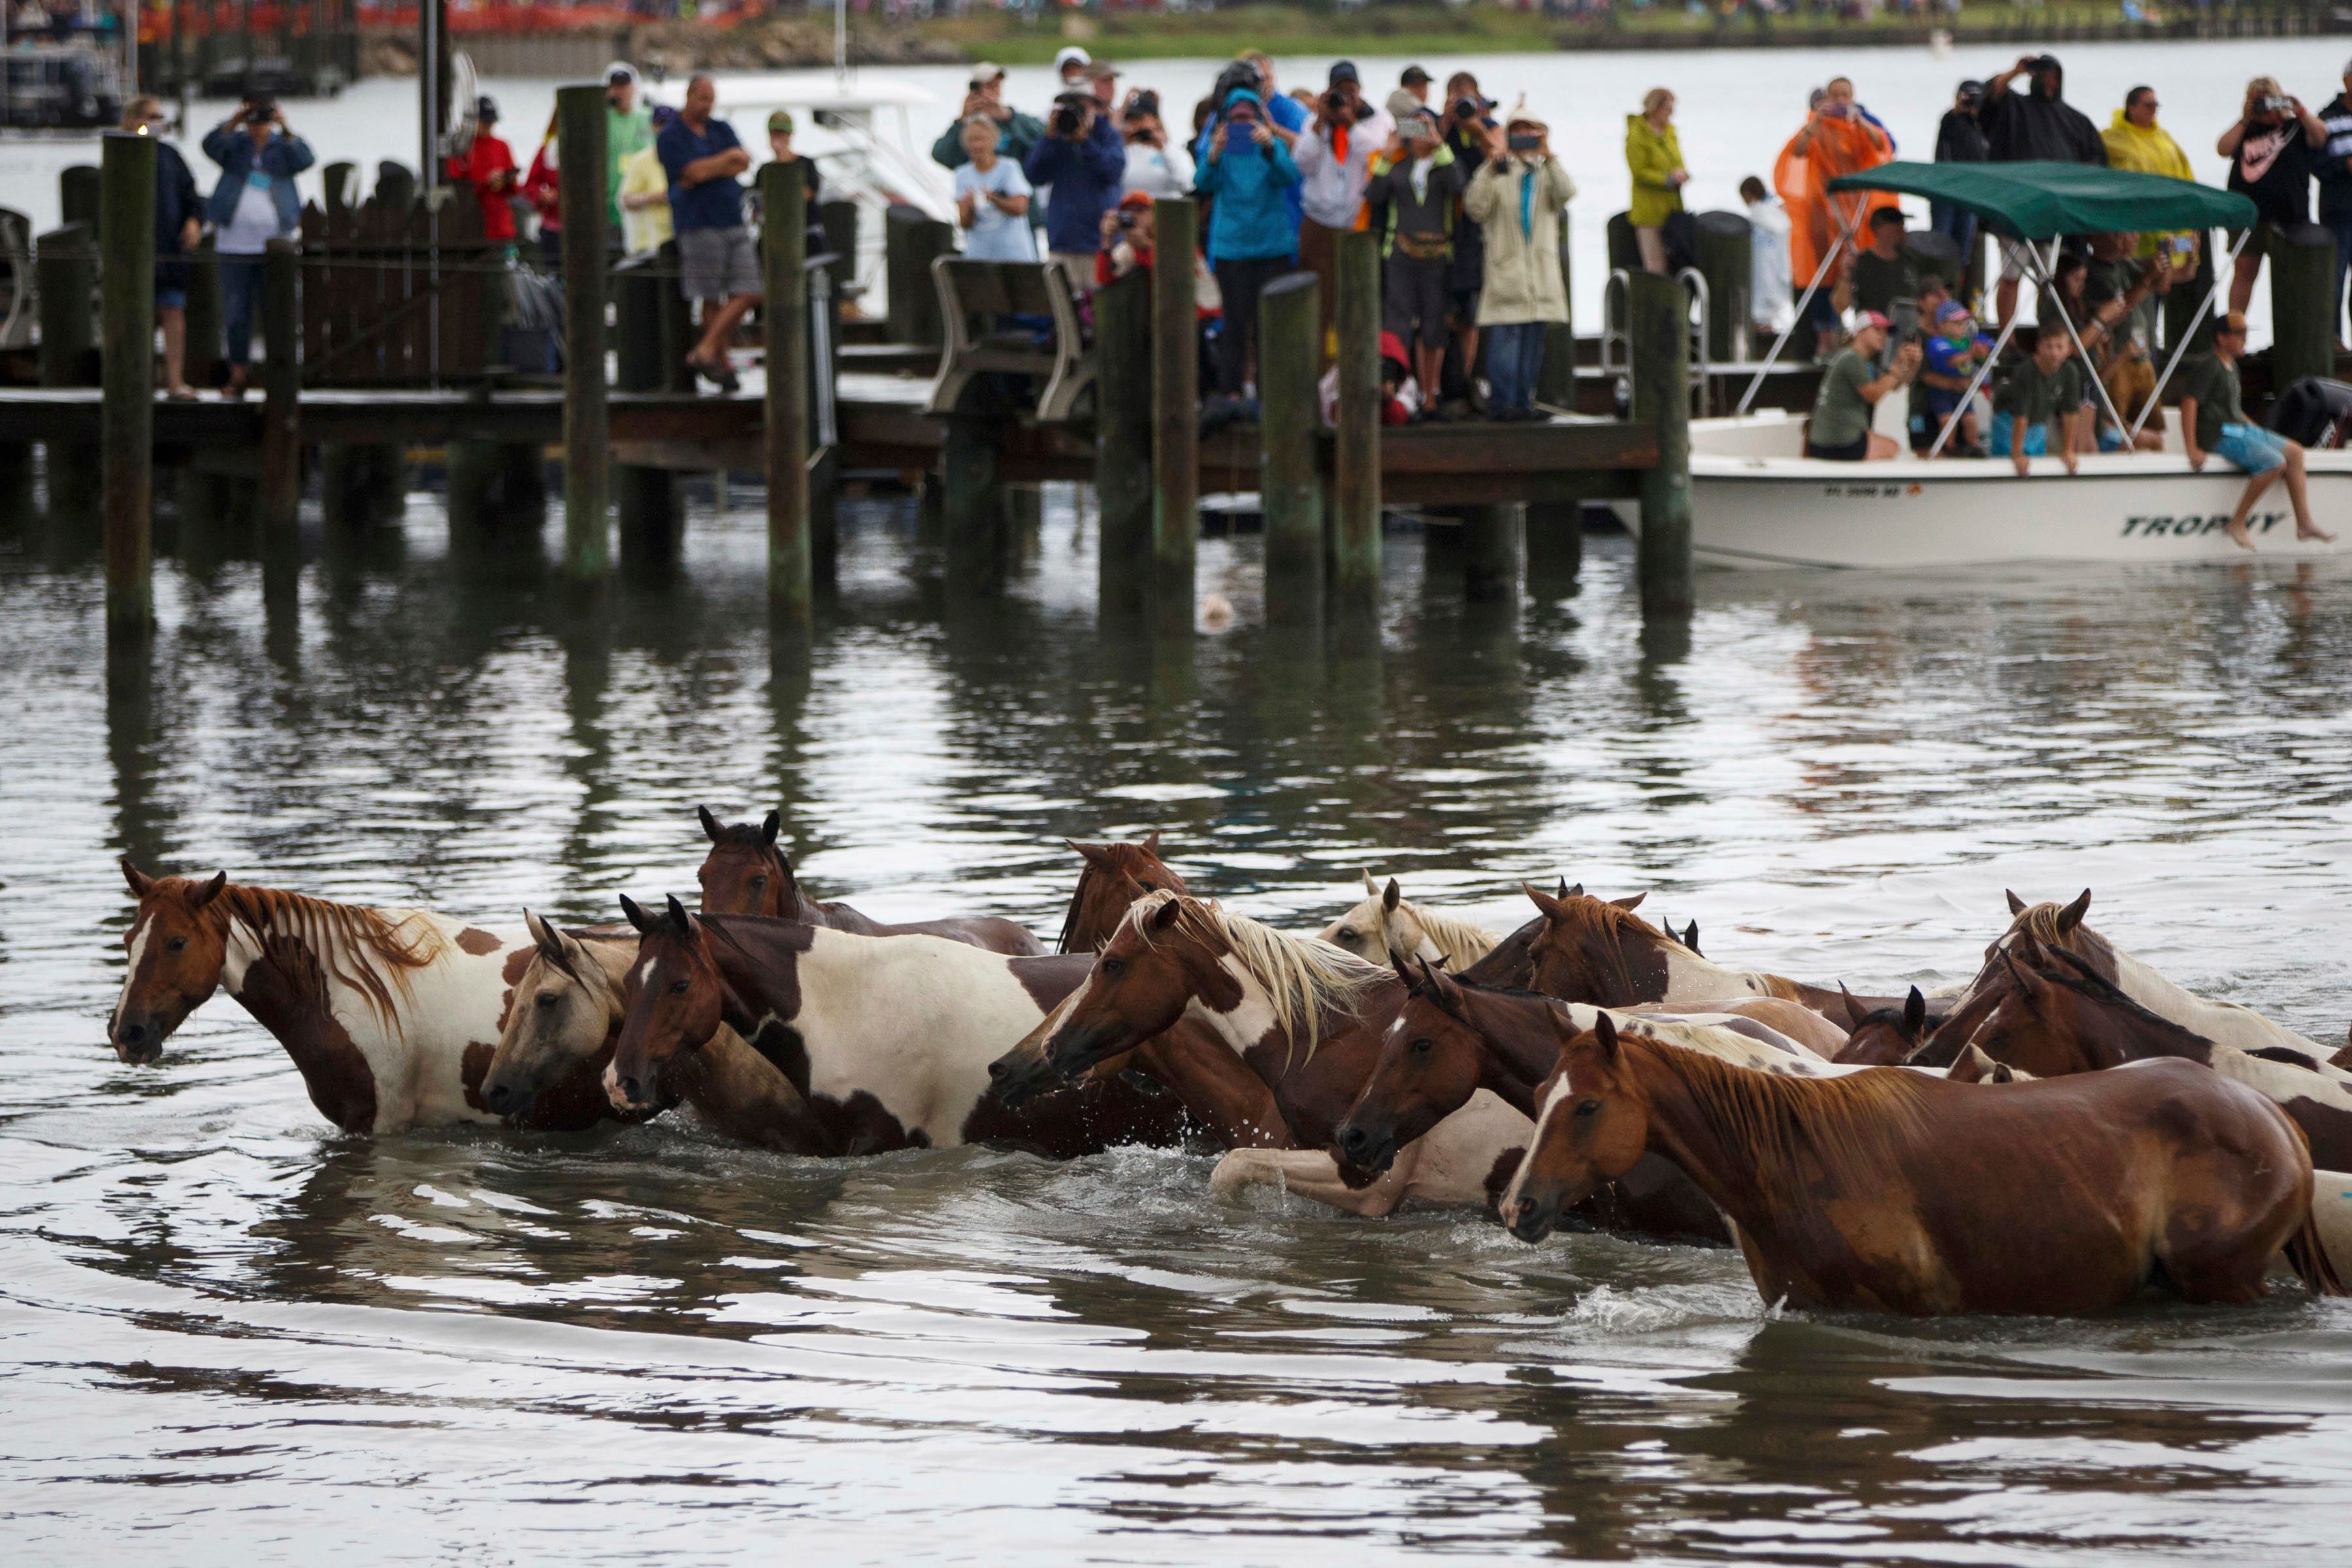 Thousands cheer swimming ponies in Chincoteague, Virginia The Seattle Times